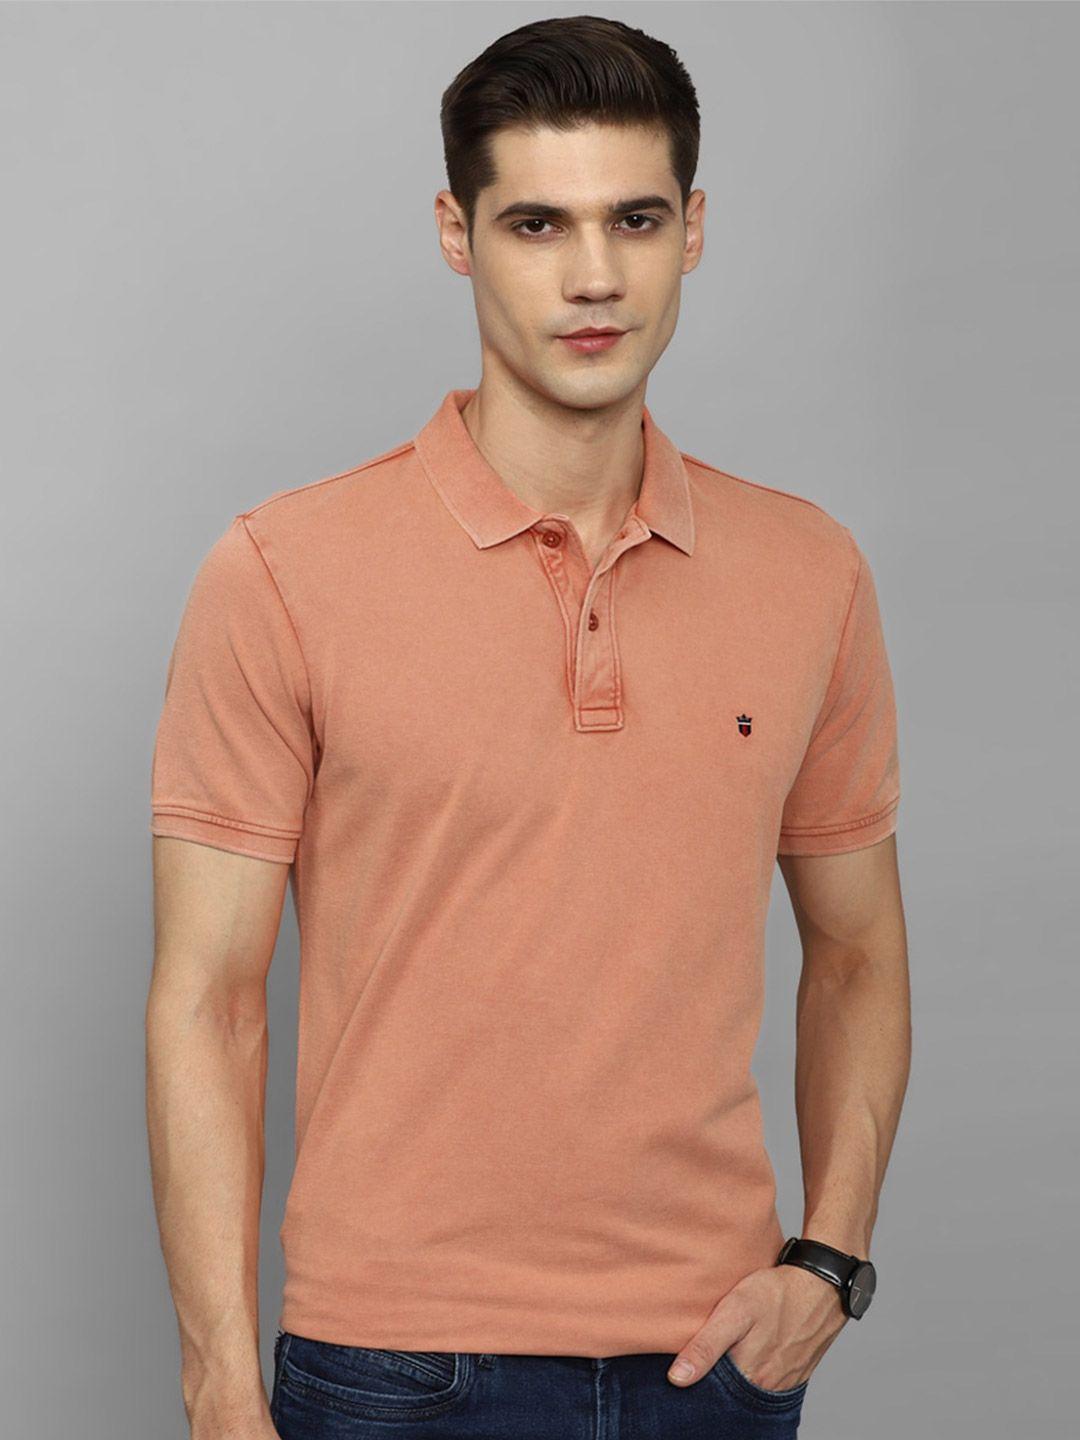 louis-philippe-jeans-polo-collar-slim-fit-pure-cotton-t-shirt